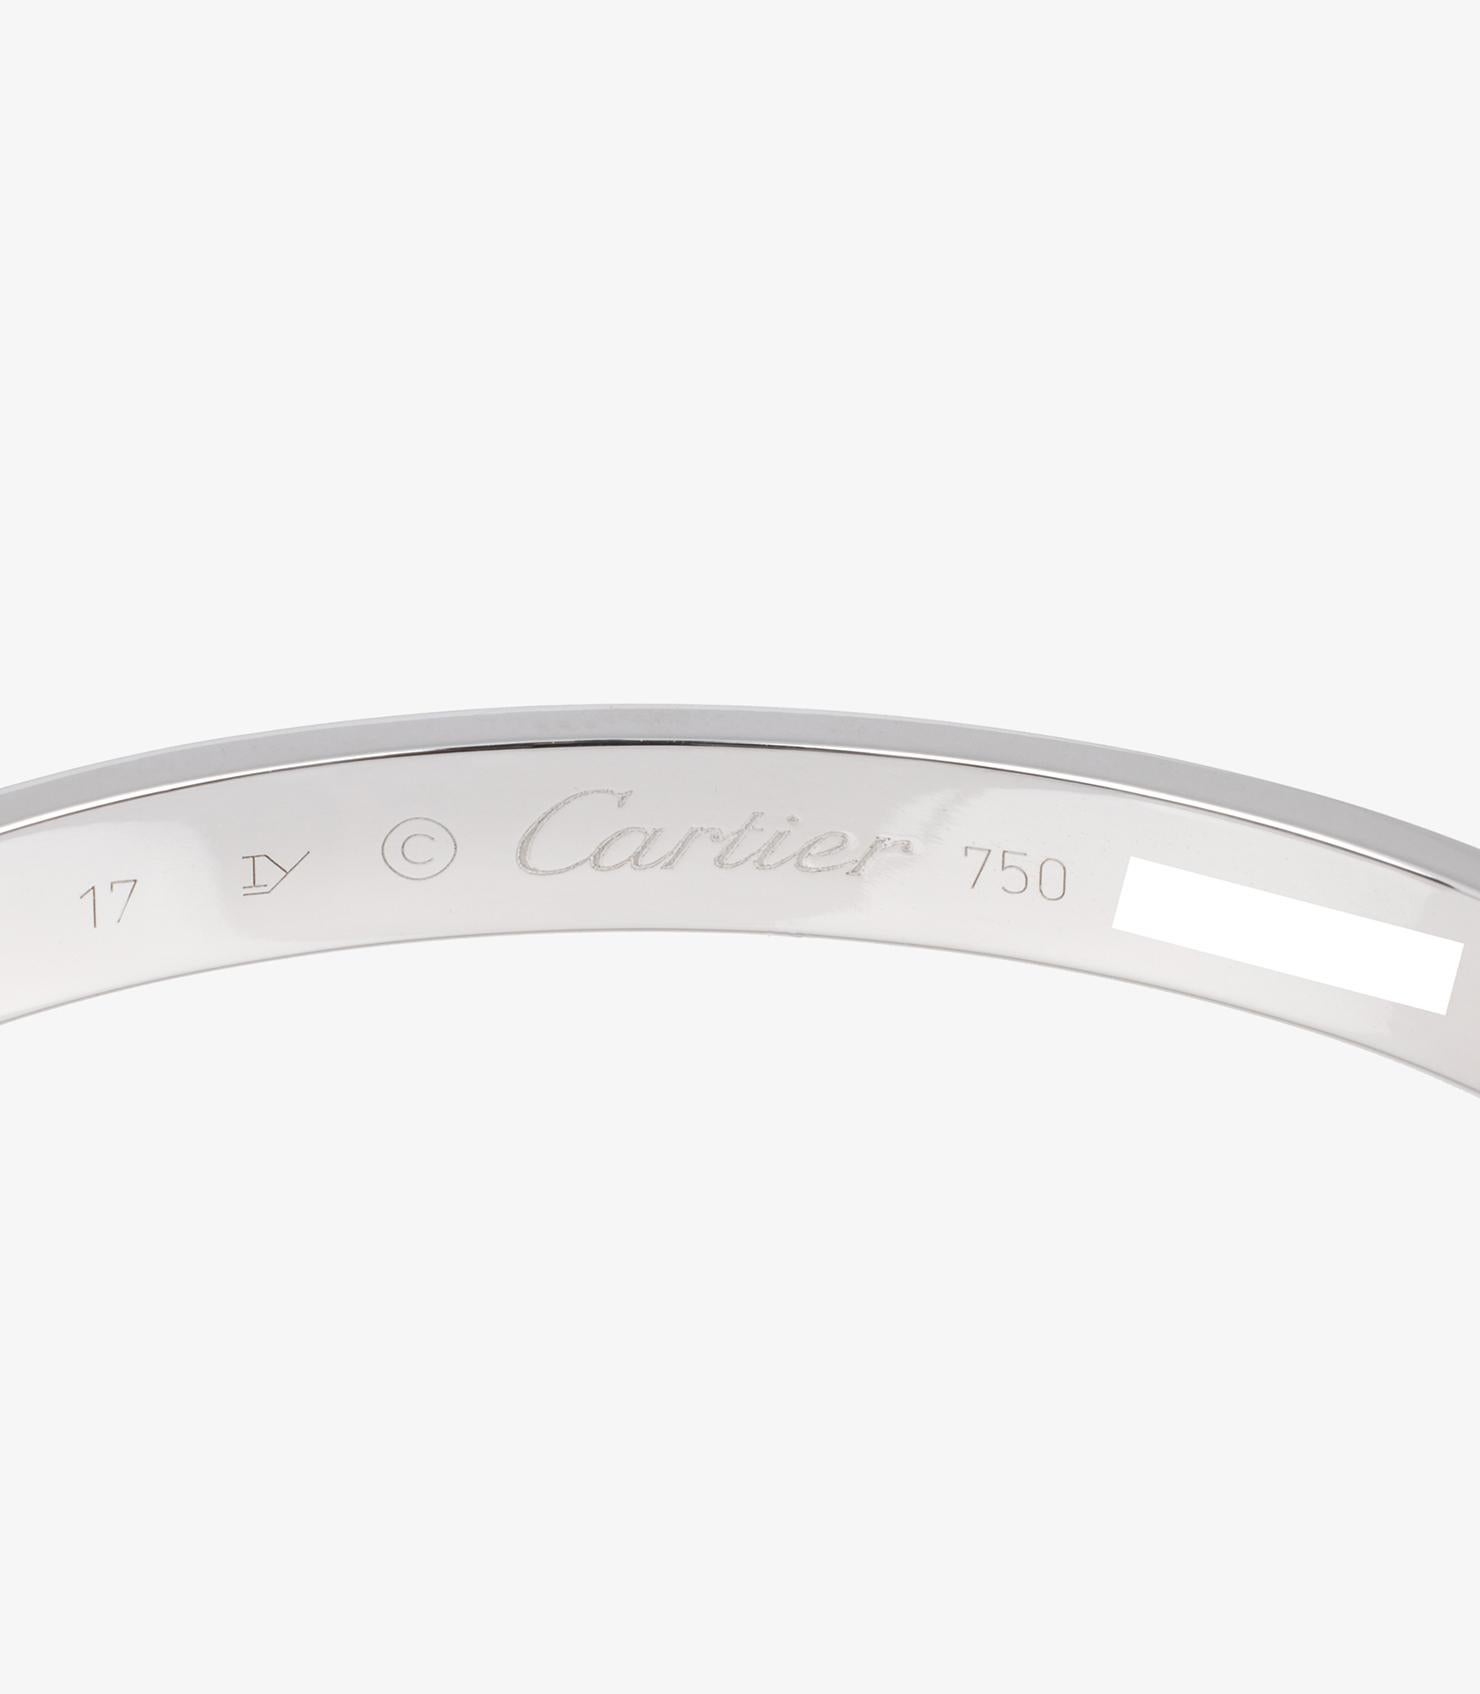 Cartier 18ct White Gold Love Cuff Bangle

Brand- Cartier
Model- Love Cuff Bangle
Product Type- Bracelet
Serial Number- EQ5213
Accompanied By- Cartier Box, Certificate, Screwdriver
Material(s)- 18ct White Gold

Bracelet Length- 17cm
Bracelet Width-